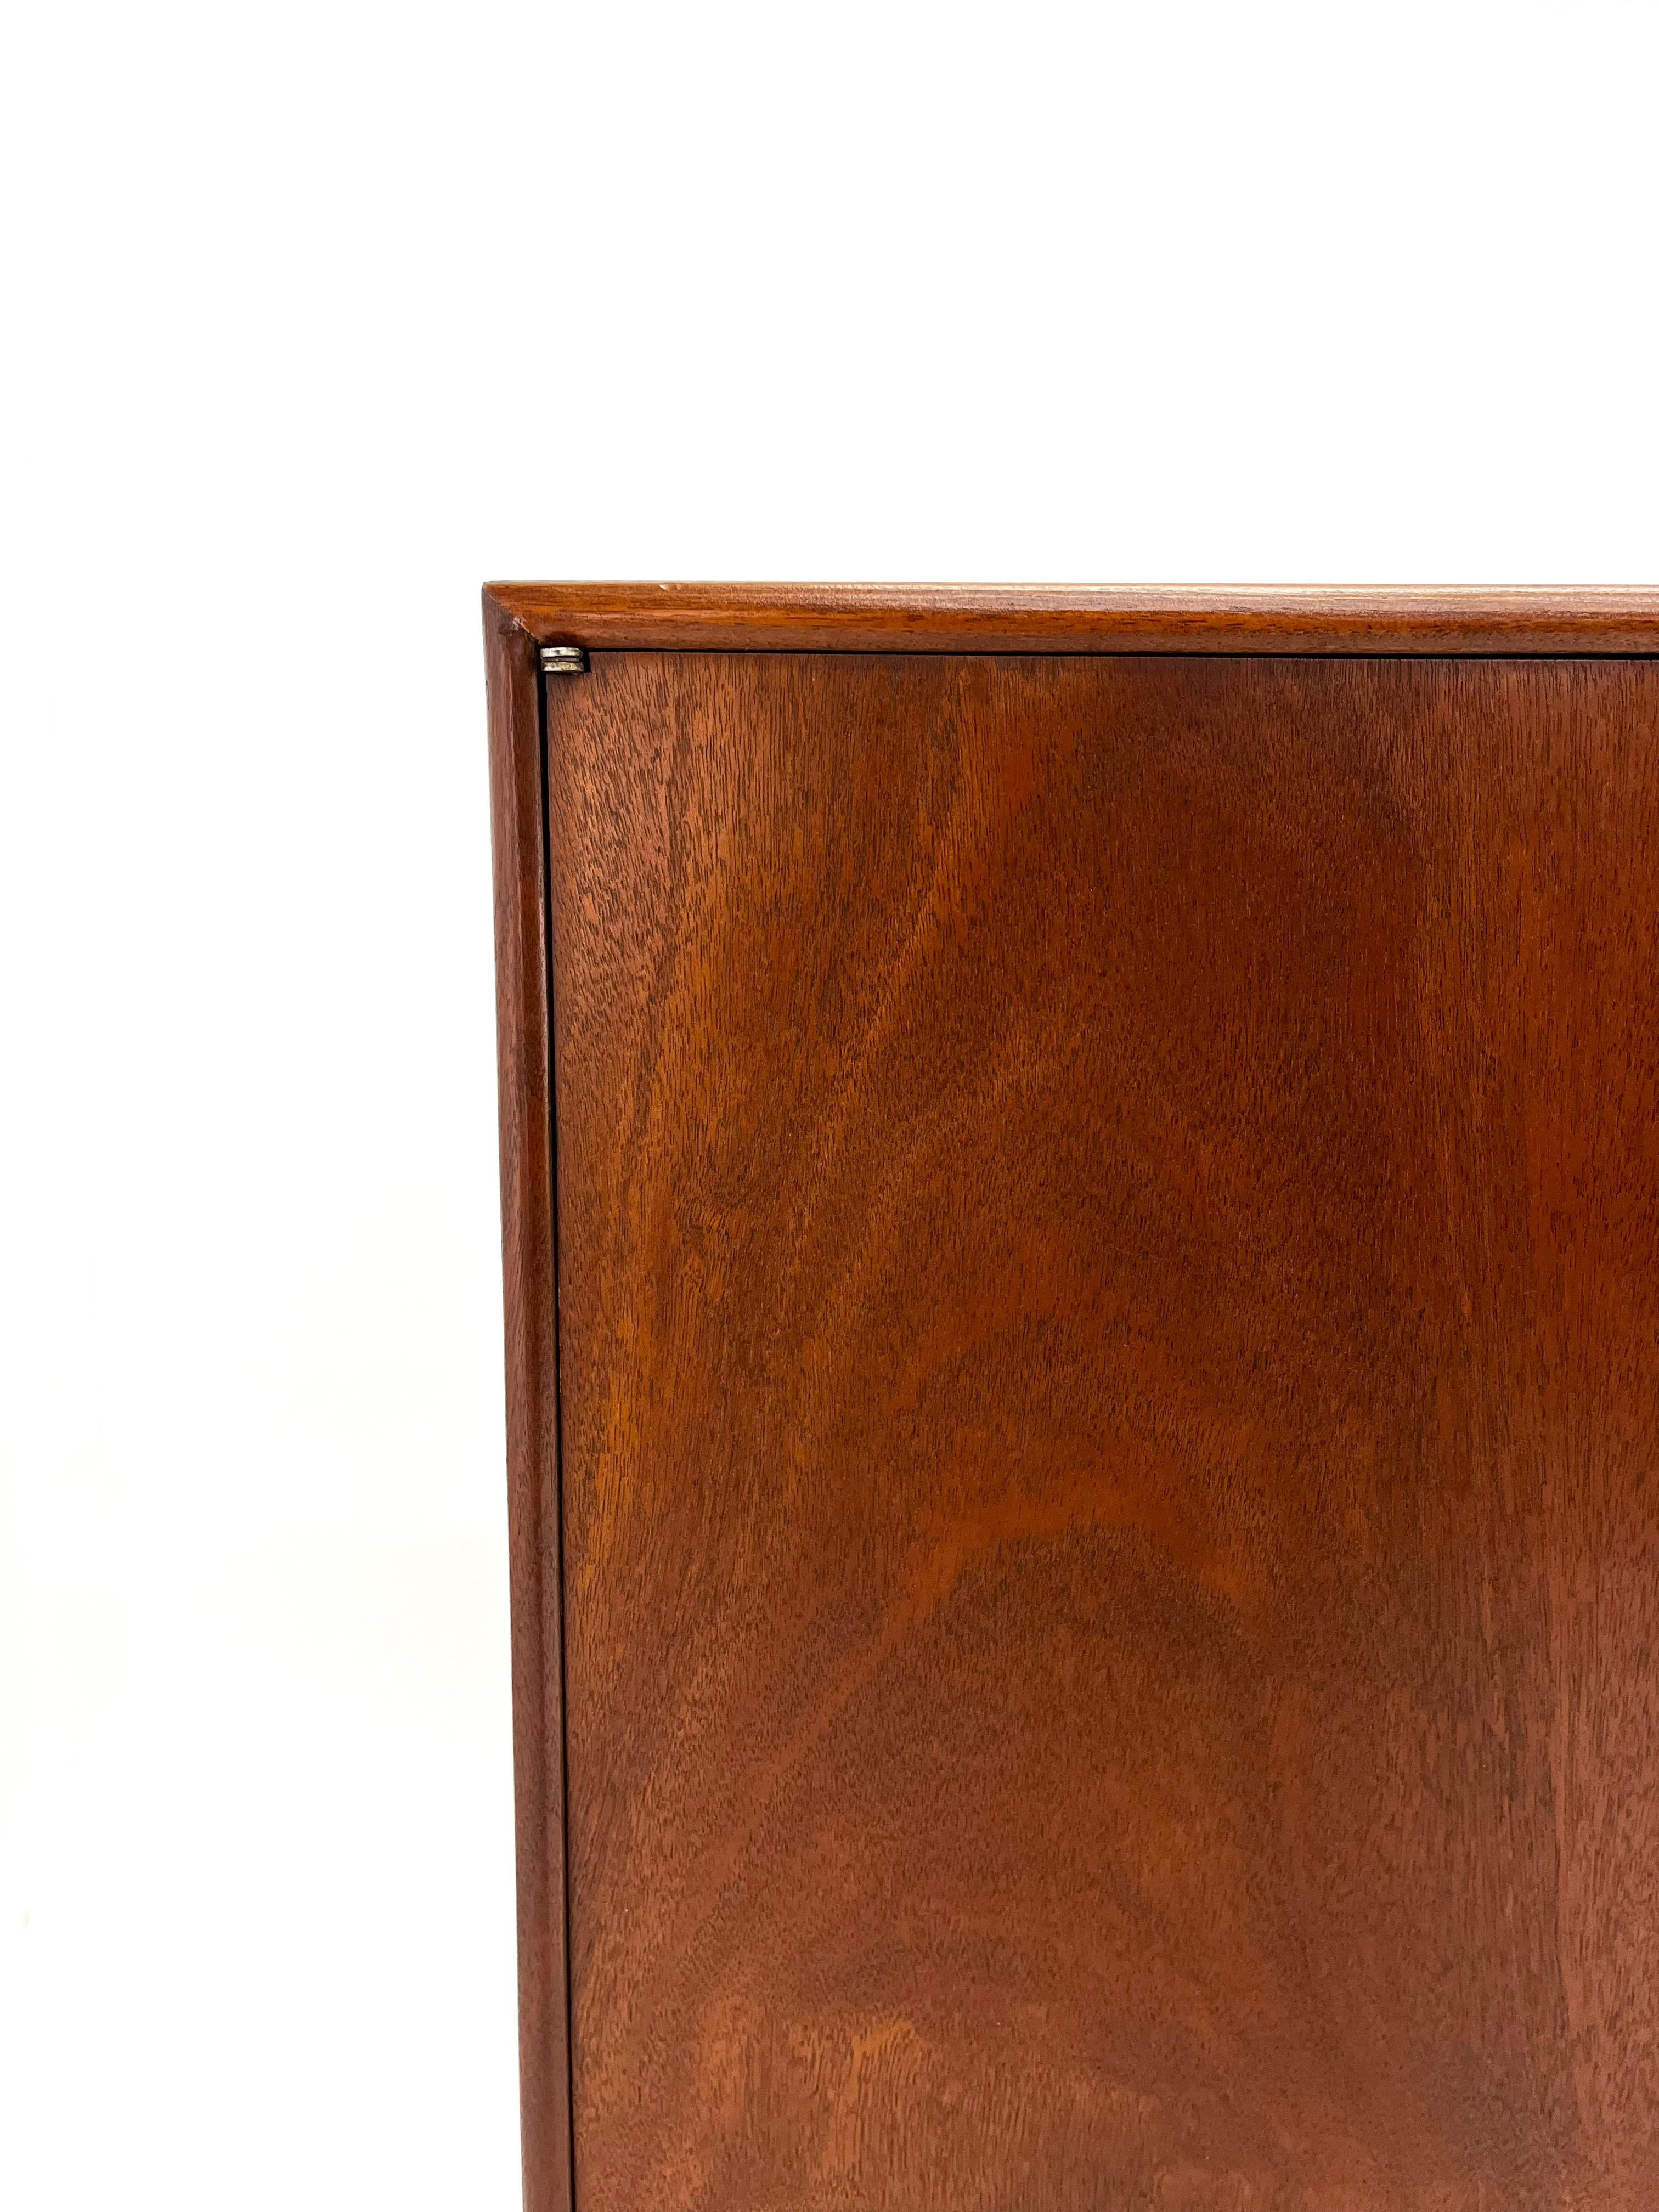 Mahogany Ray Sabota for Mt. Airy Gentleman's Cabinet w/ Vanity For Sale